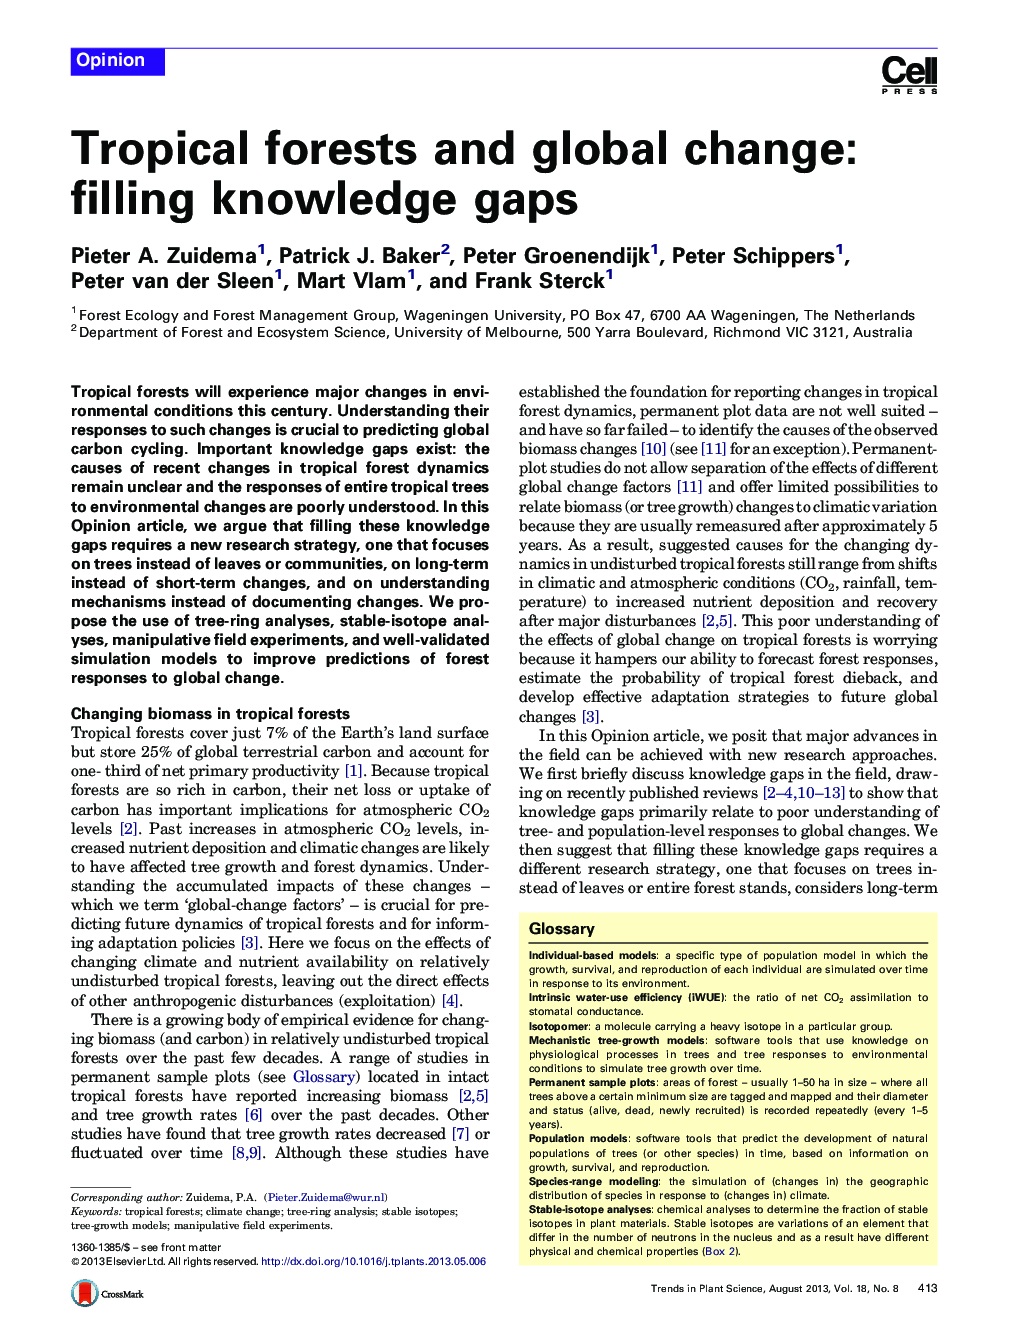 Tropical forests and global change: filling knowledge gaps